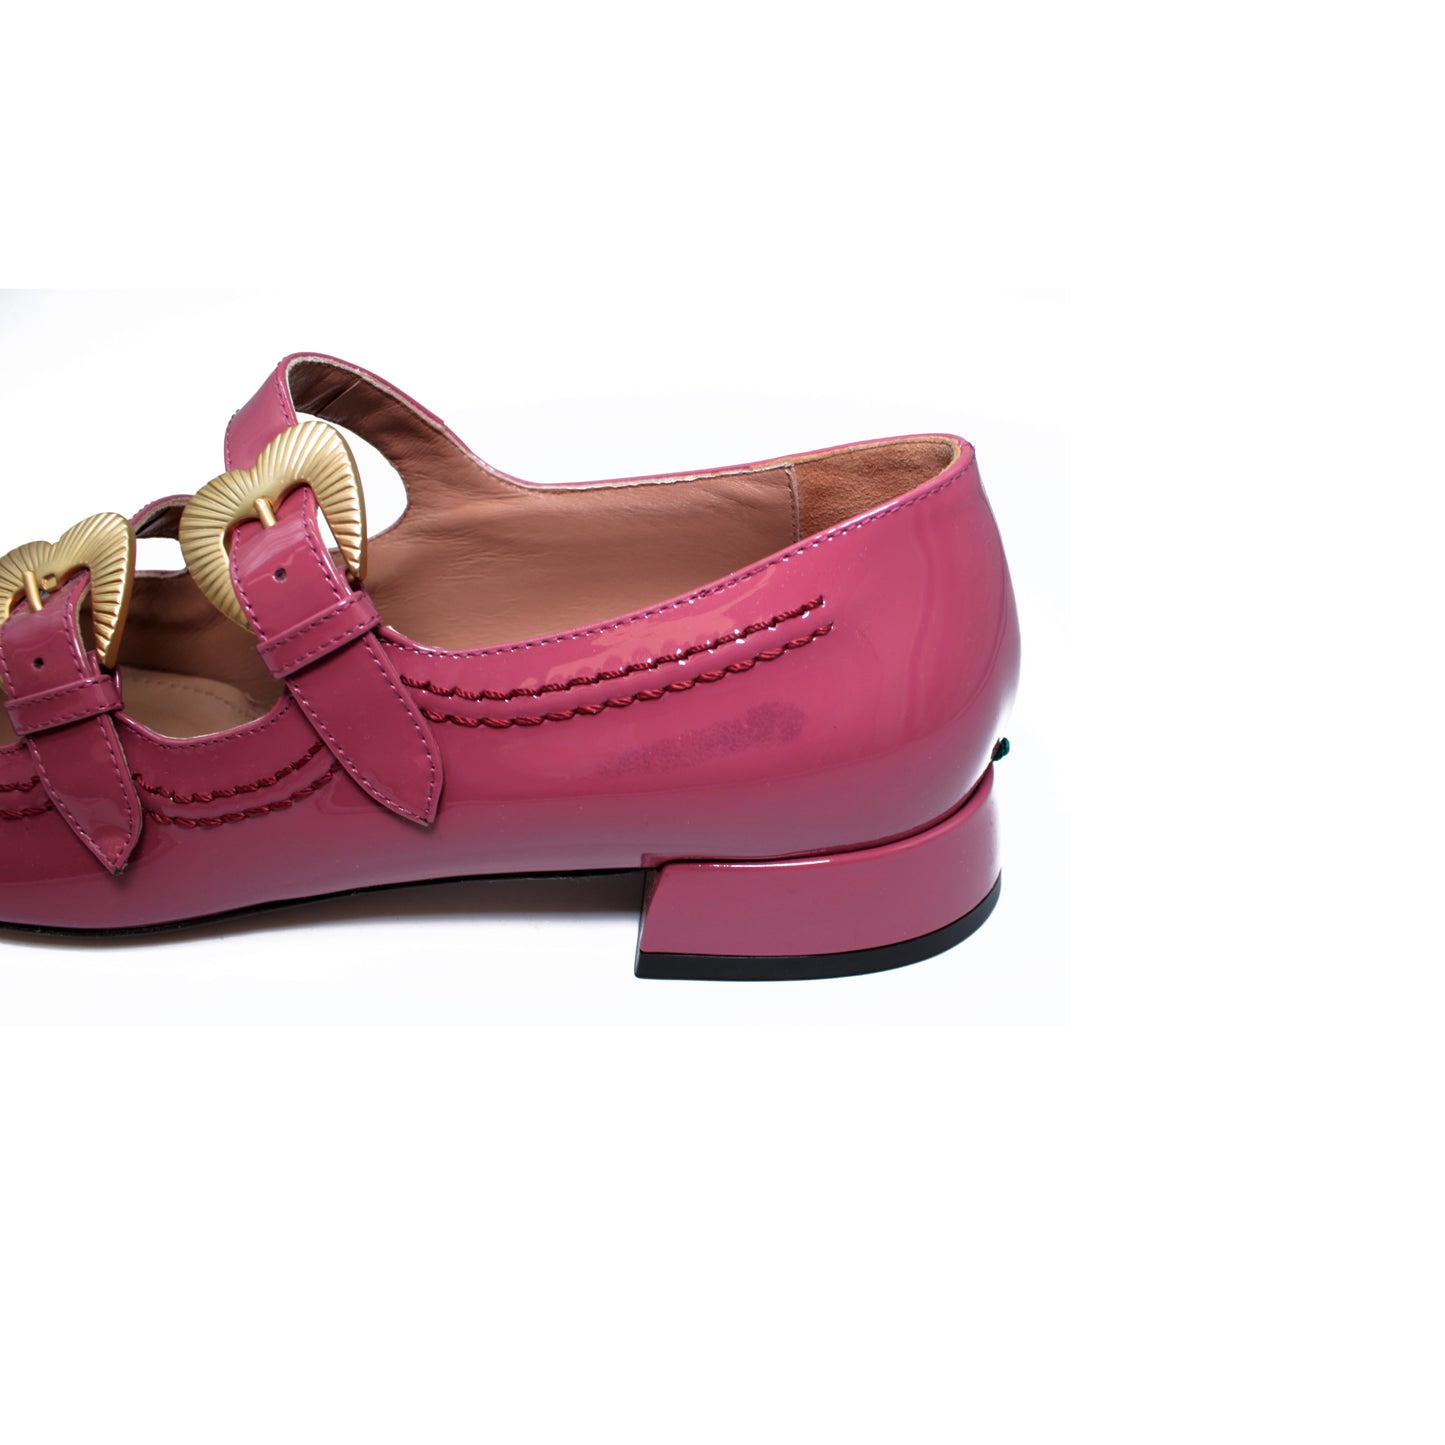 Double strap in hibiscus-coloured patent leather - Second life